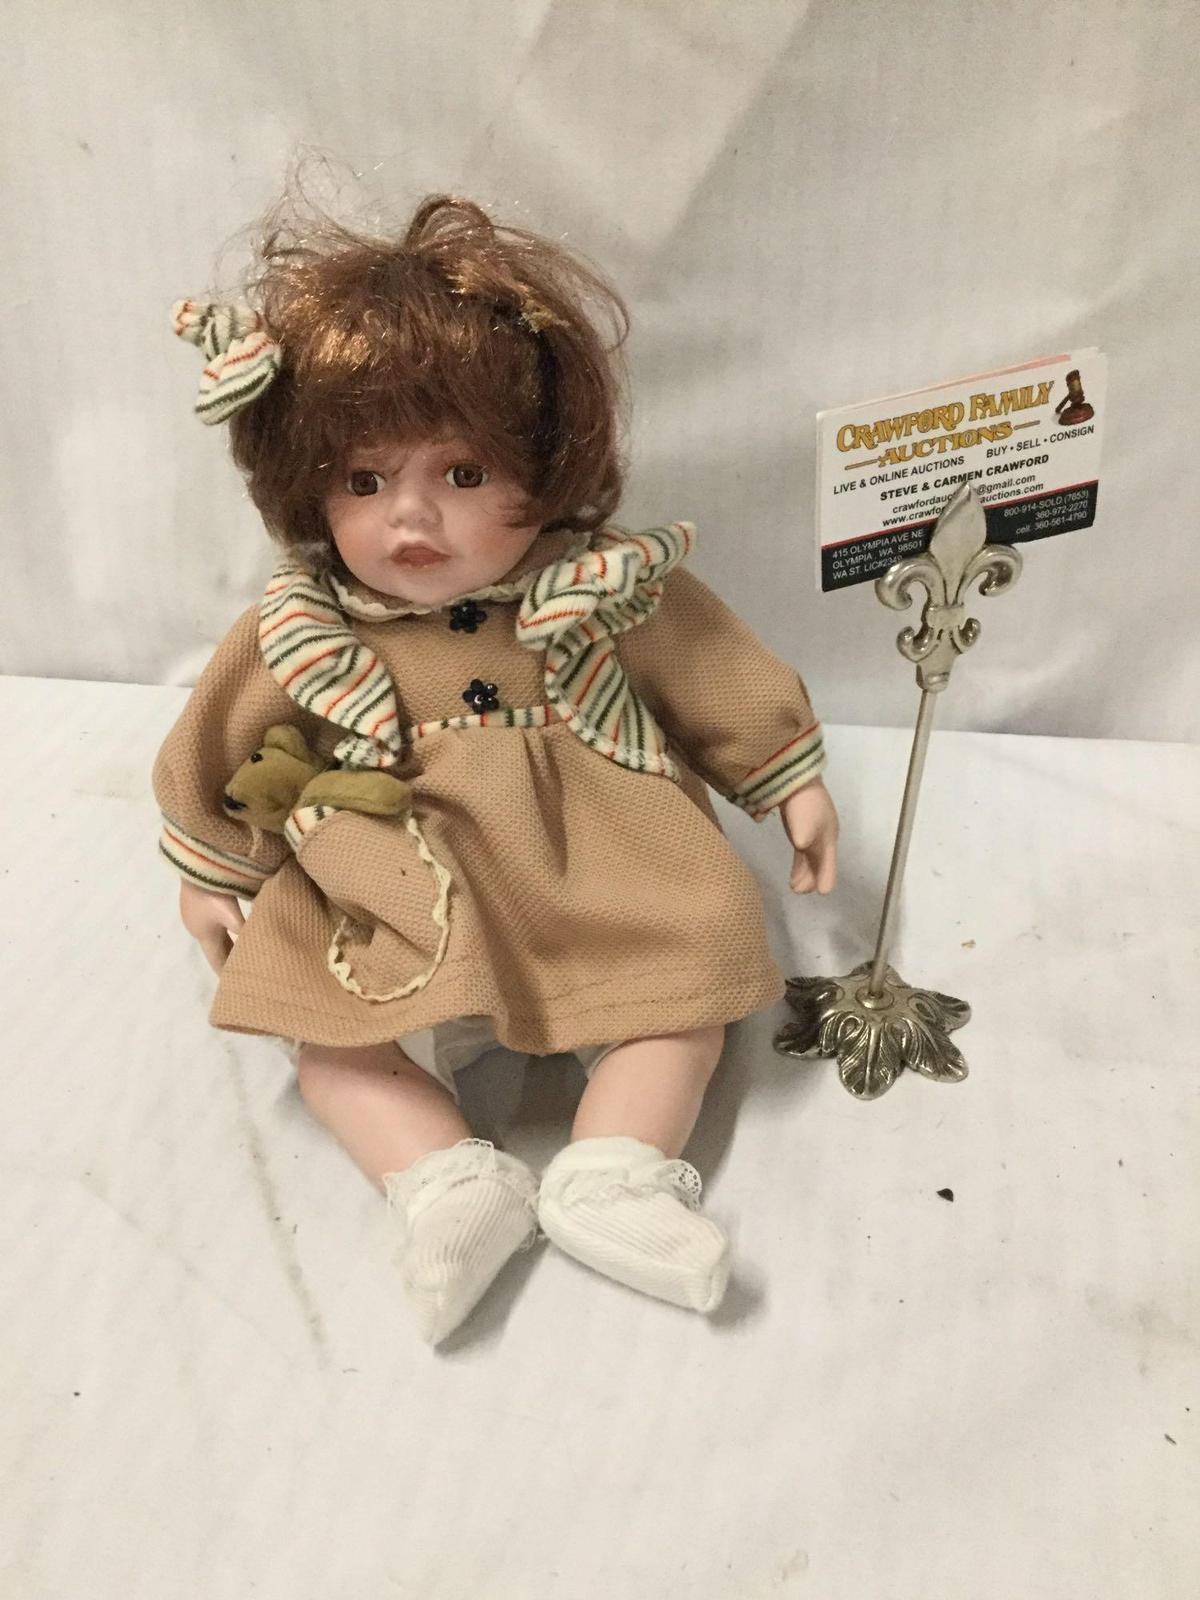 Duck House Heirloom porcelain doll. Numbered 184/5000. Measures approximately 14x9x9 inches.